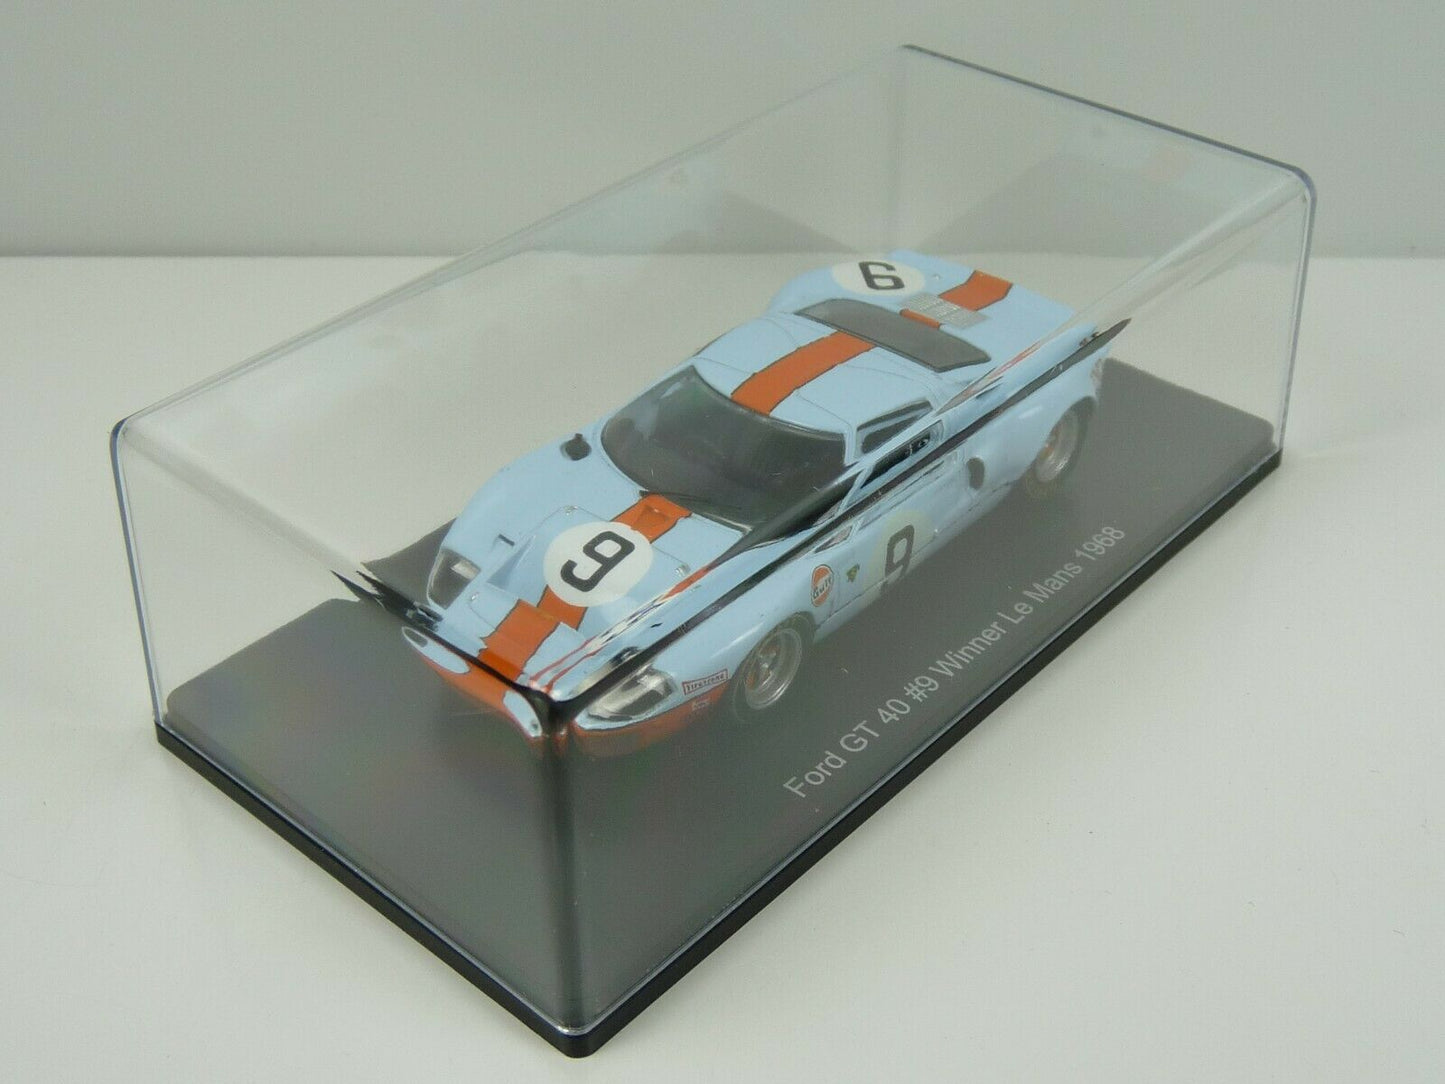 Lot 3 Voitures 1/43 IXO FORD GT 40 : 24 heures Mans + 2017 + déagostini